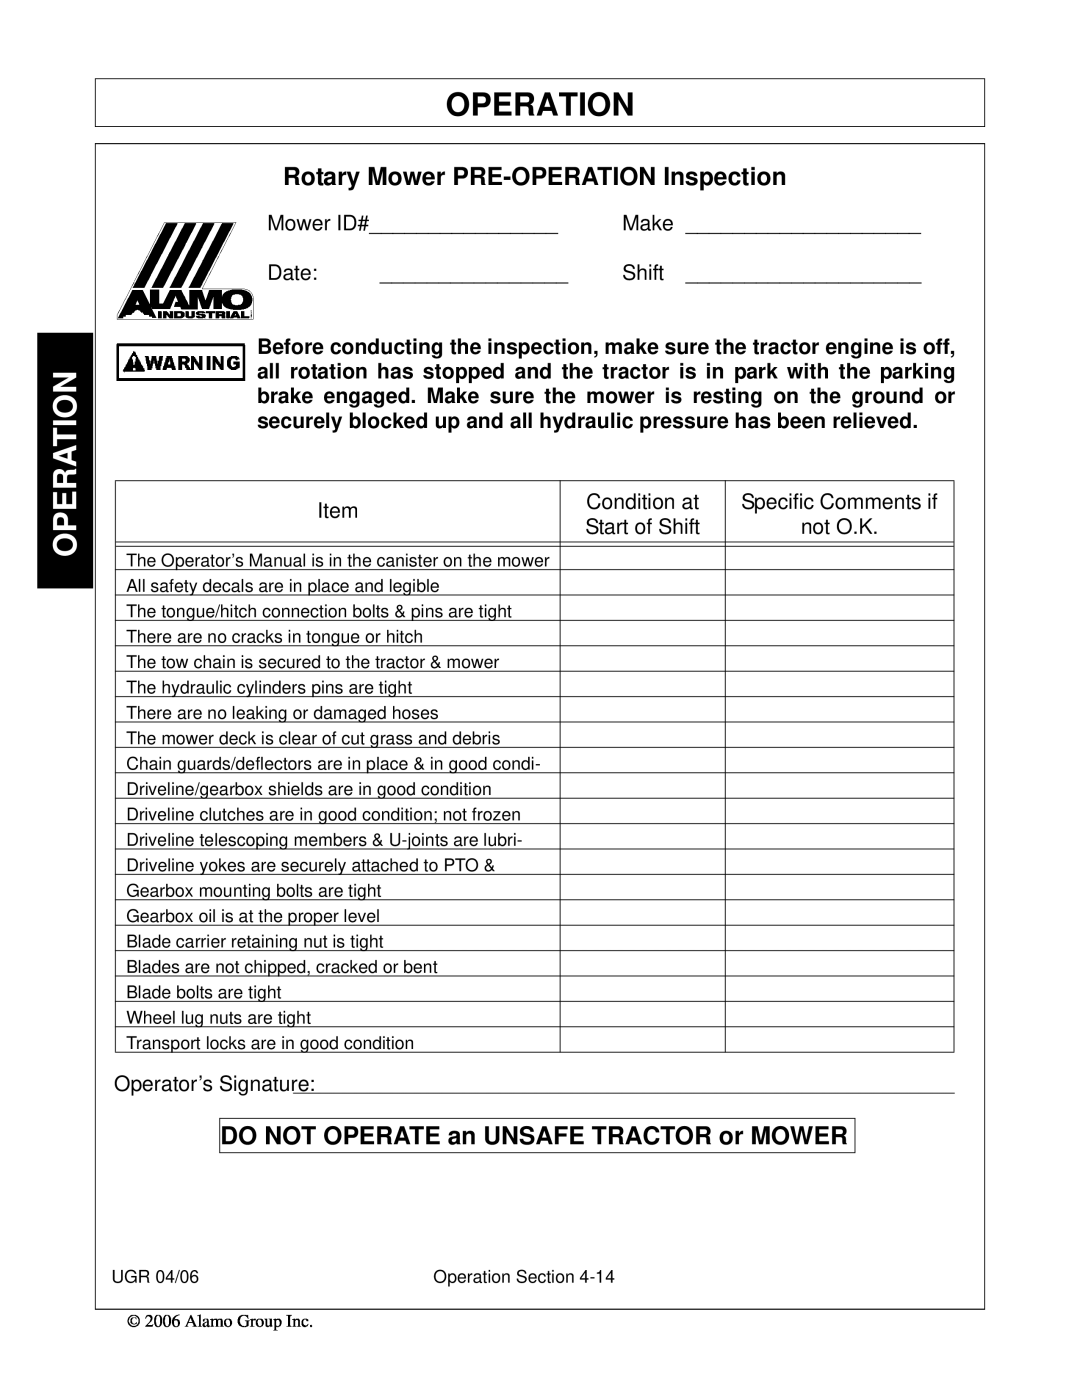 Alamo 02979718C manual Rotary Mower PRE-OPERATIONInspection, Operation, DO NOT OPERATE an UNSAFE TRACTOR or MOWER 